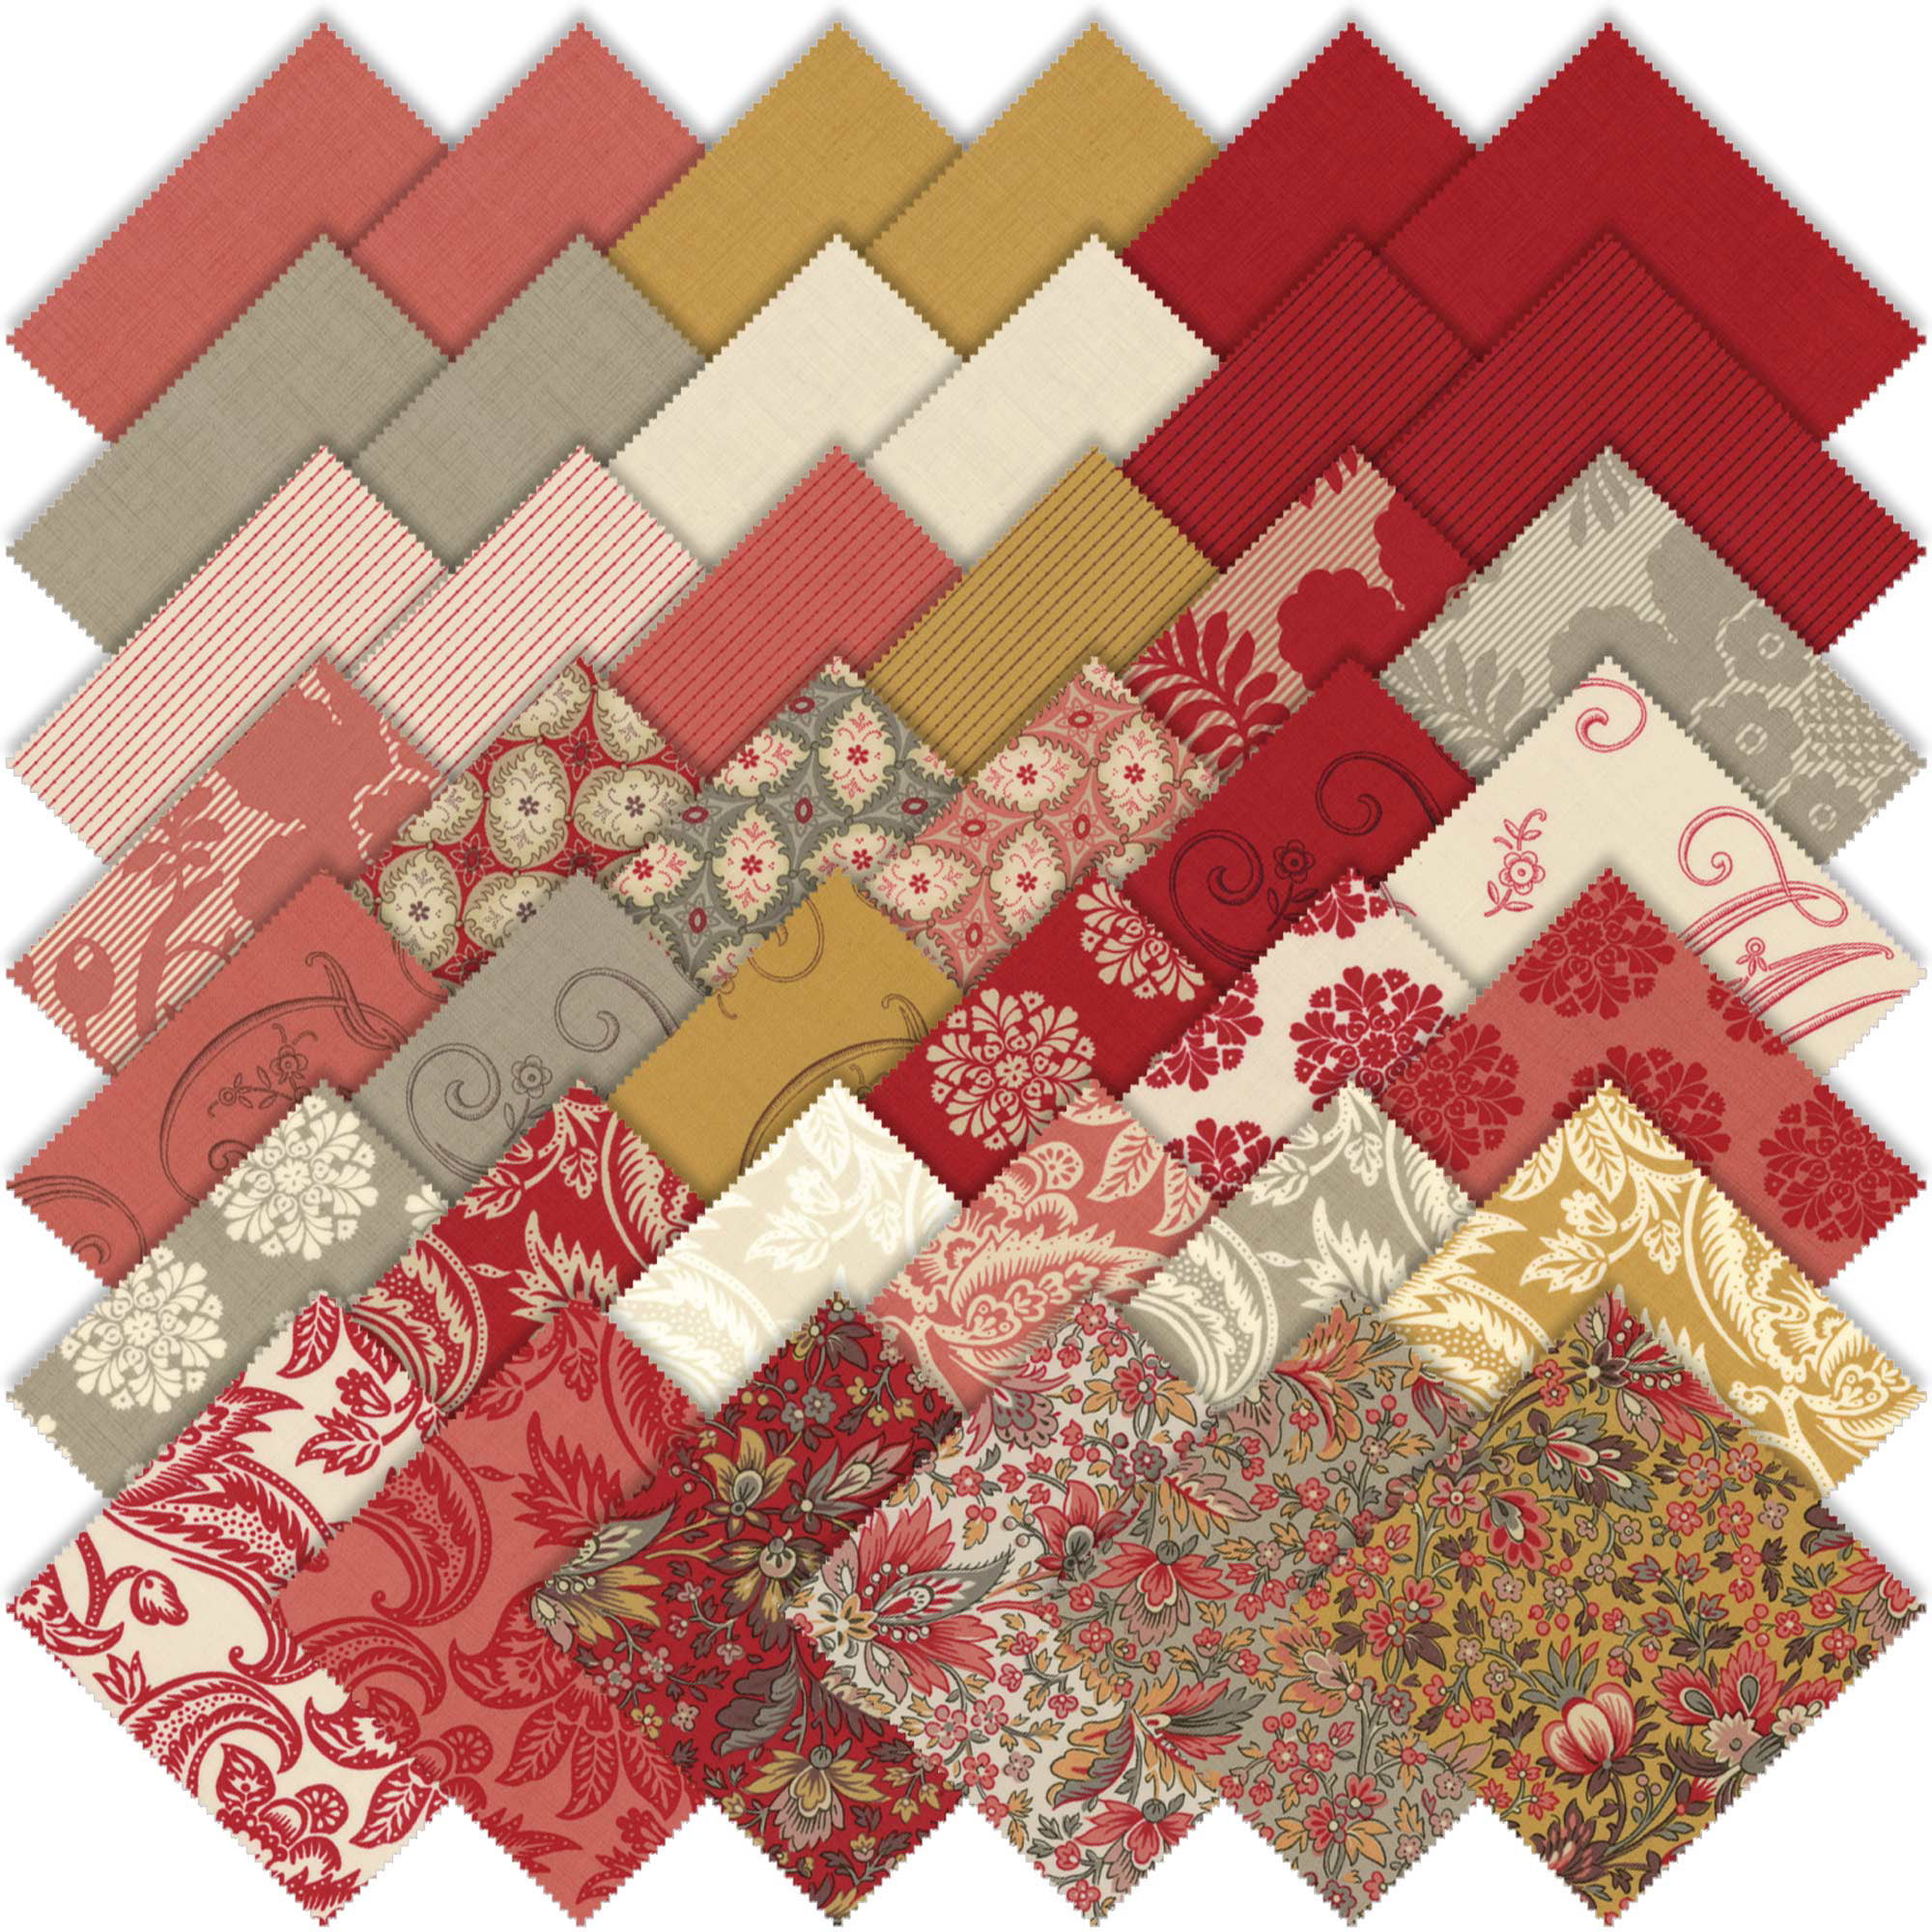  10 Fat Quarters - Assorted Moda French General France